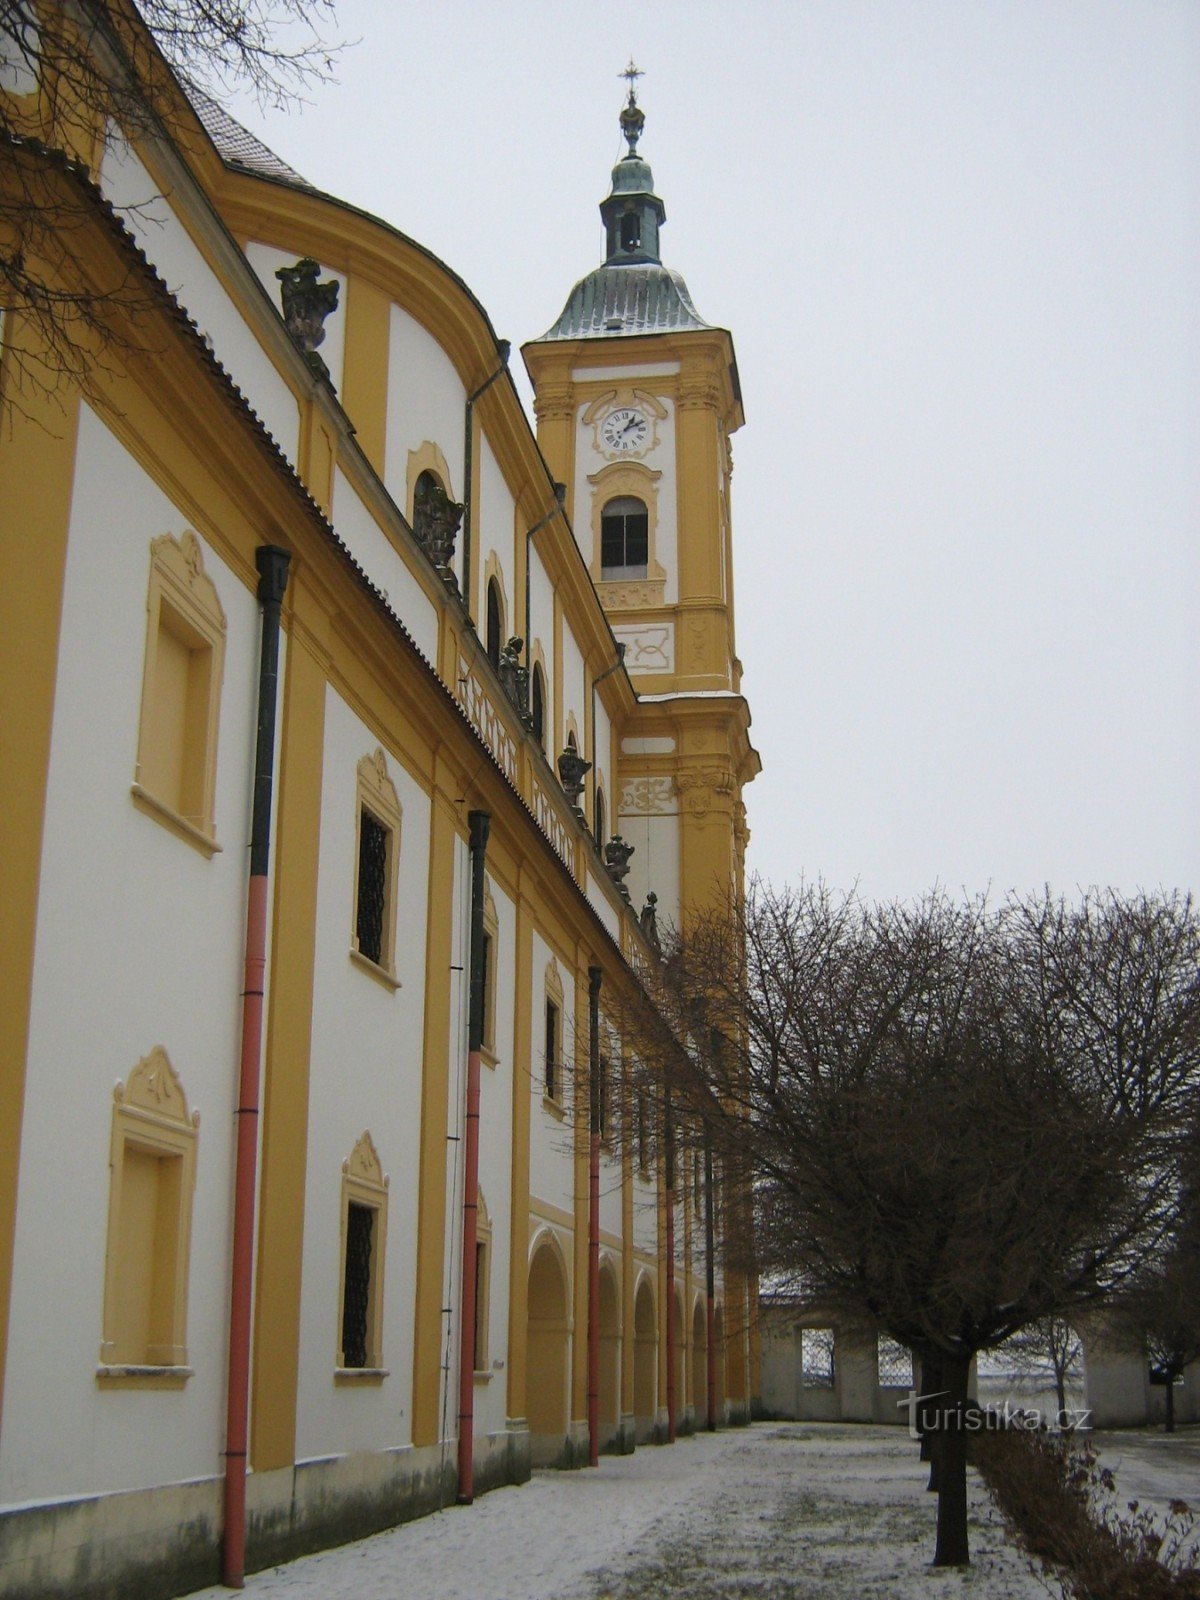 Dub nad Moravou - pilgrimage church of the Purification of the Virgin Mary